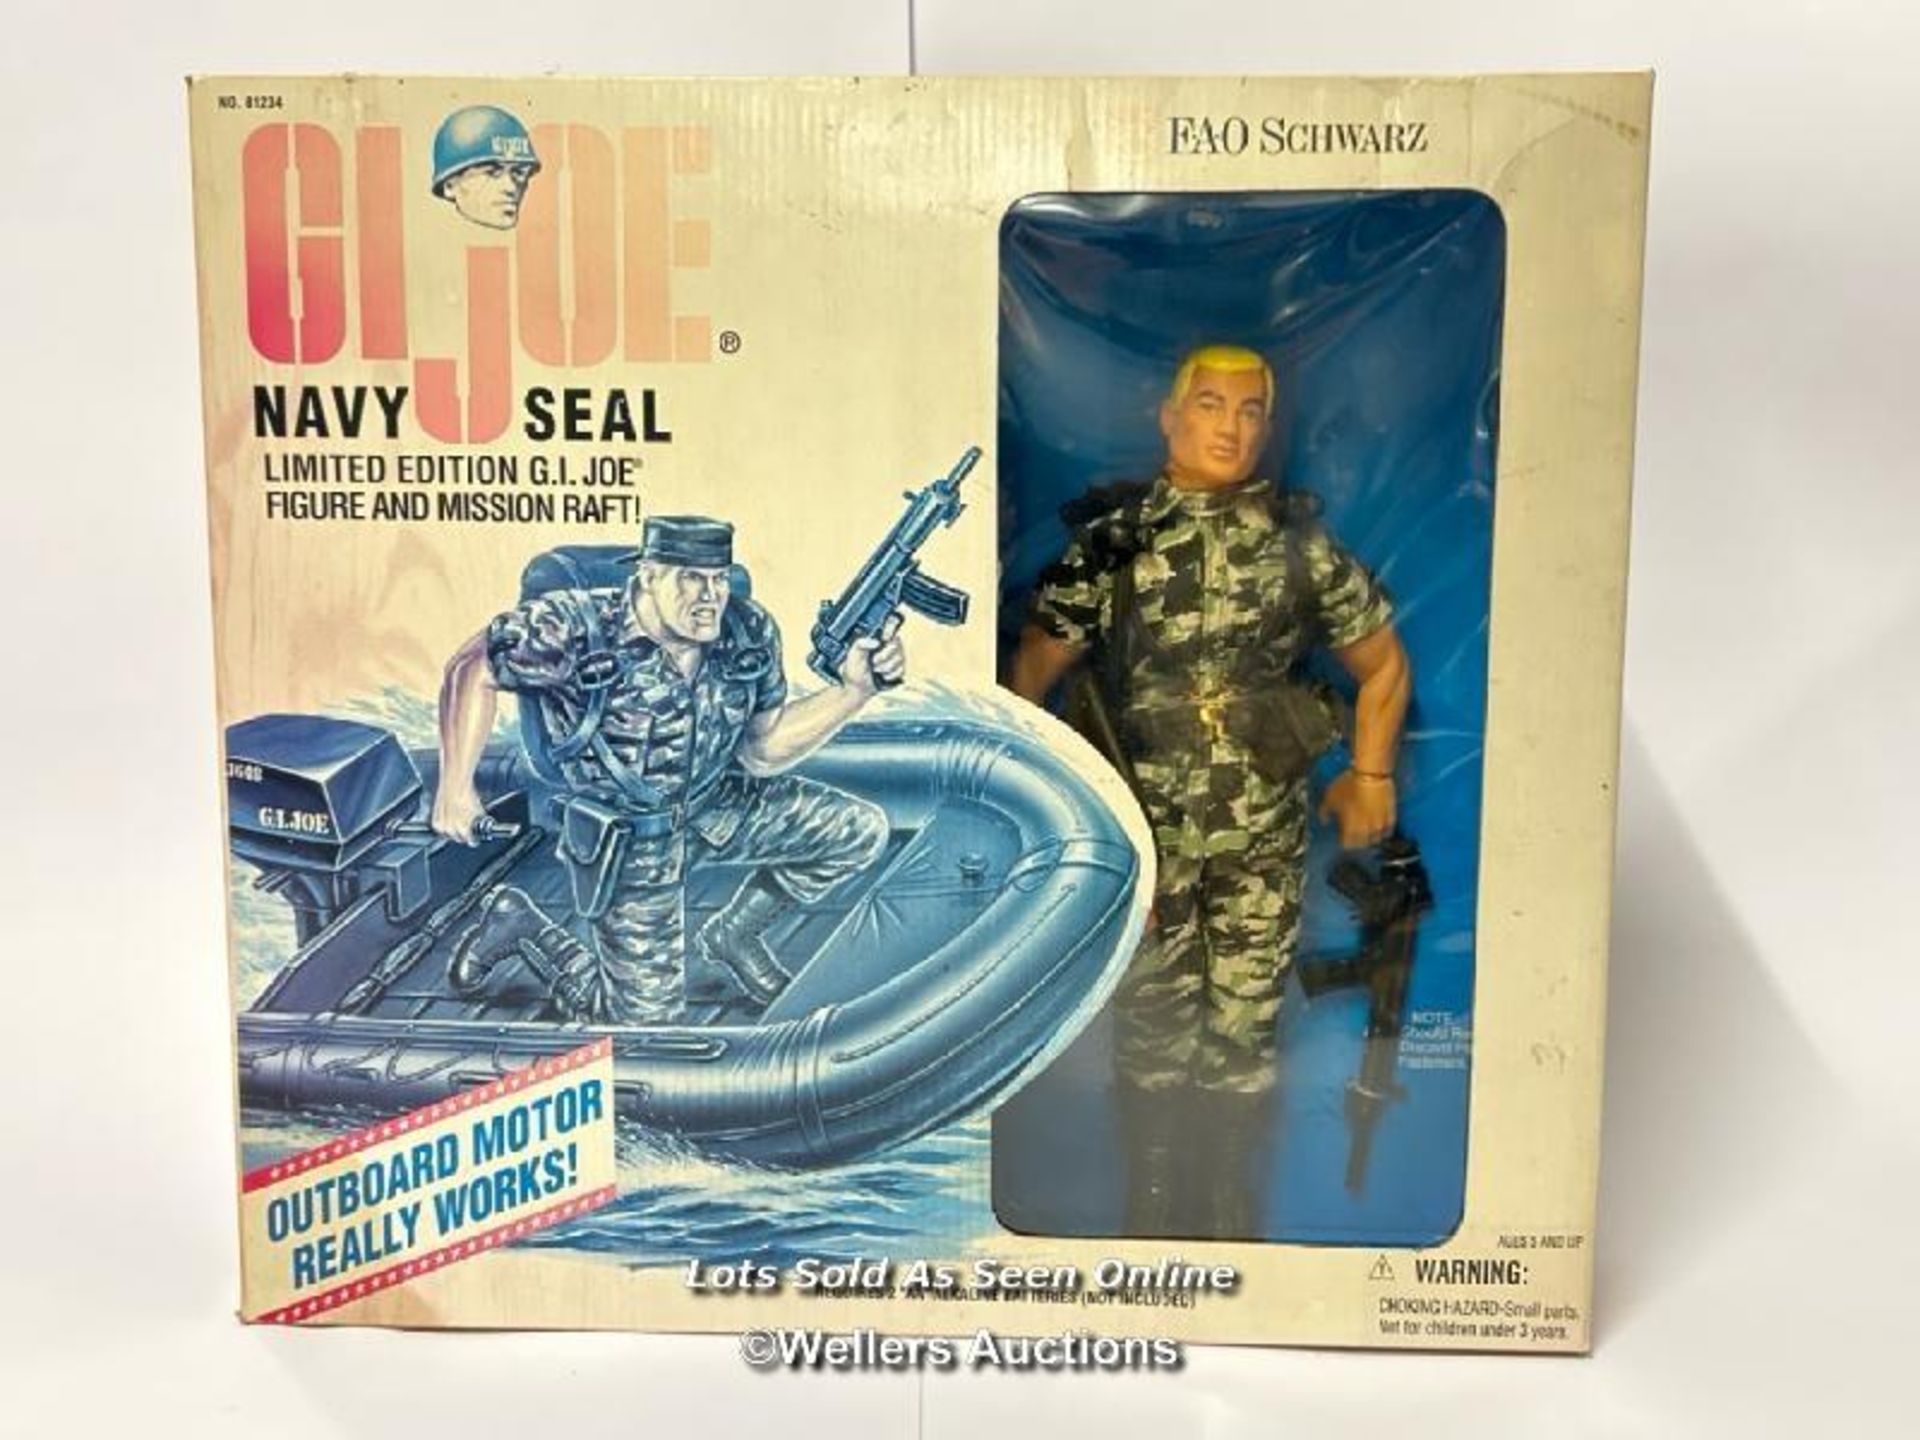 Kenner GI Joe 12" Navy Seal with Mission Raft, F.A.O. Schwartz special edition, 1995. unopened but